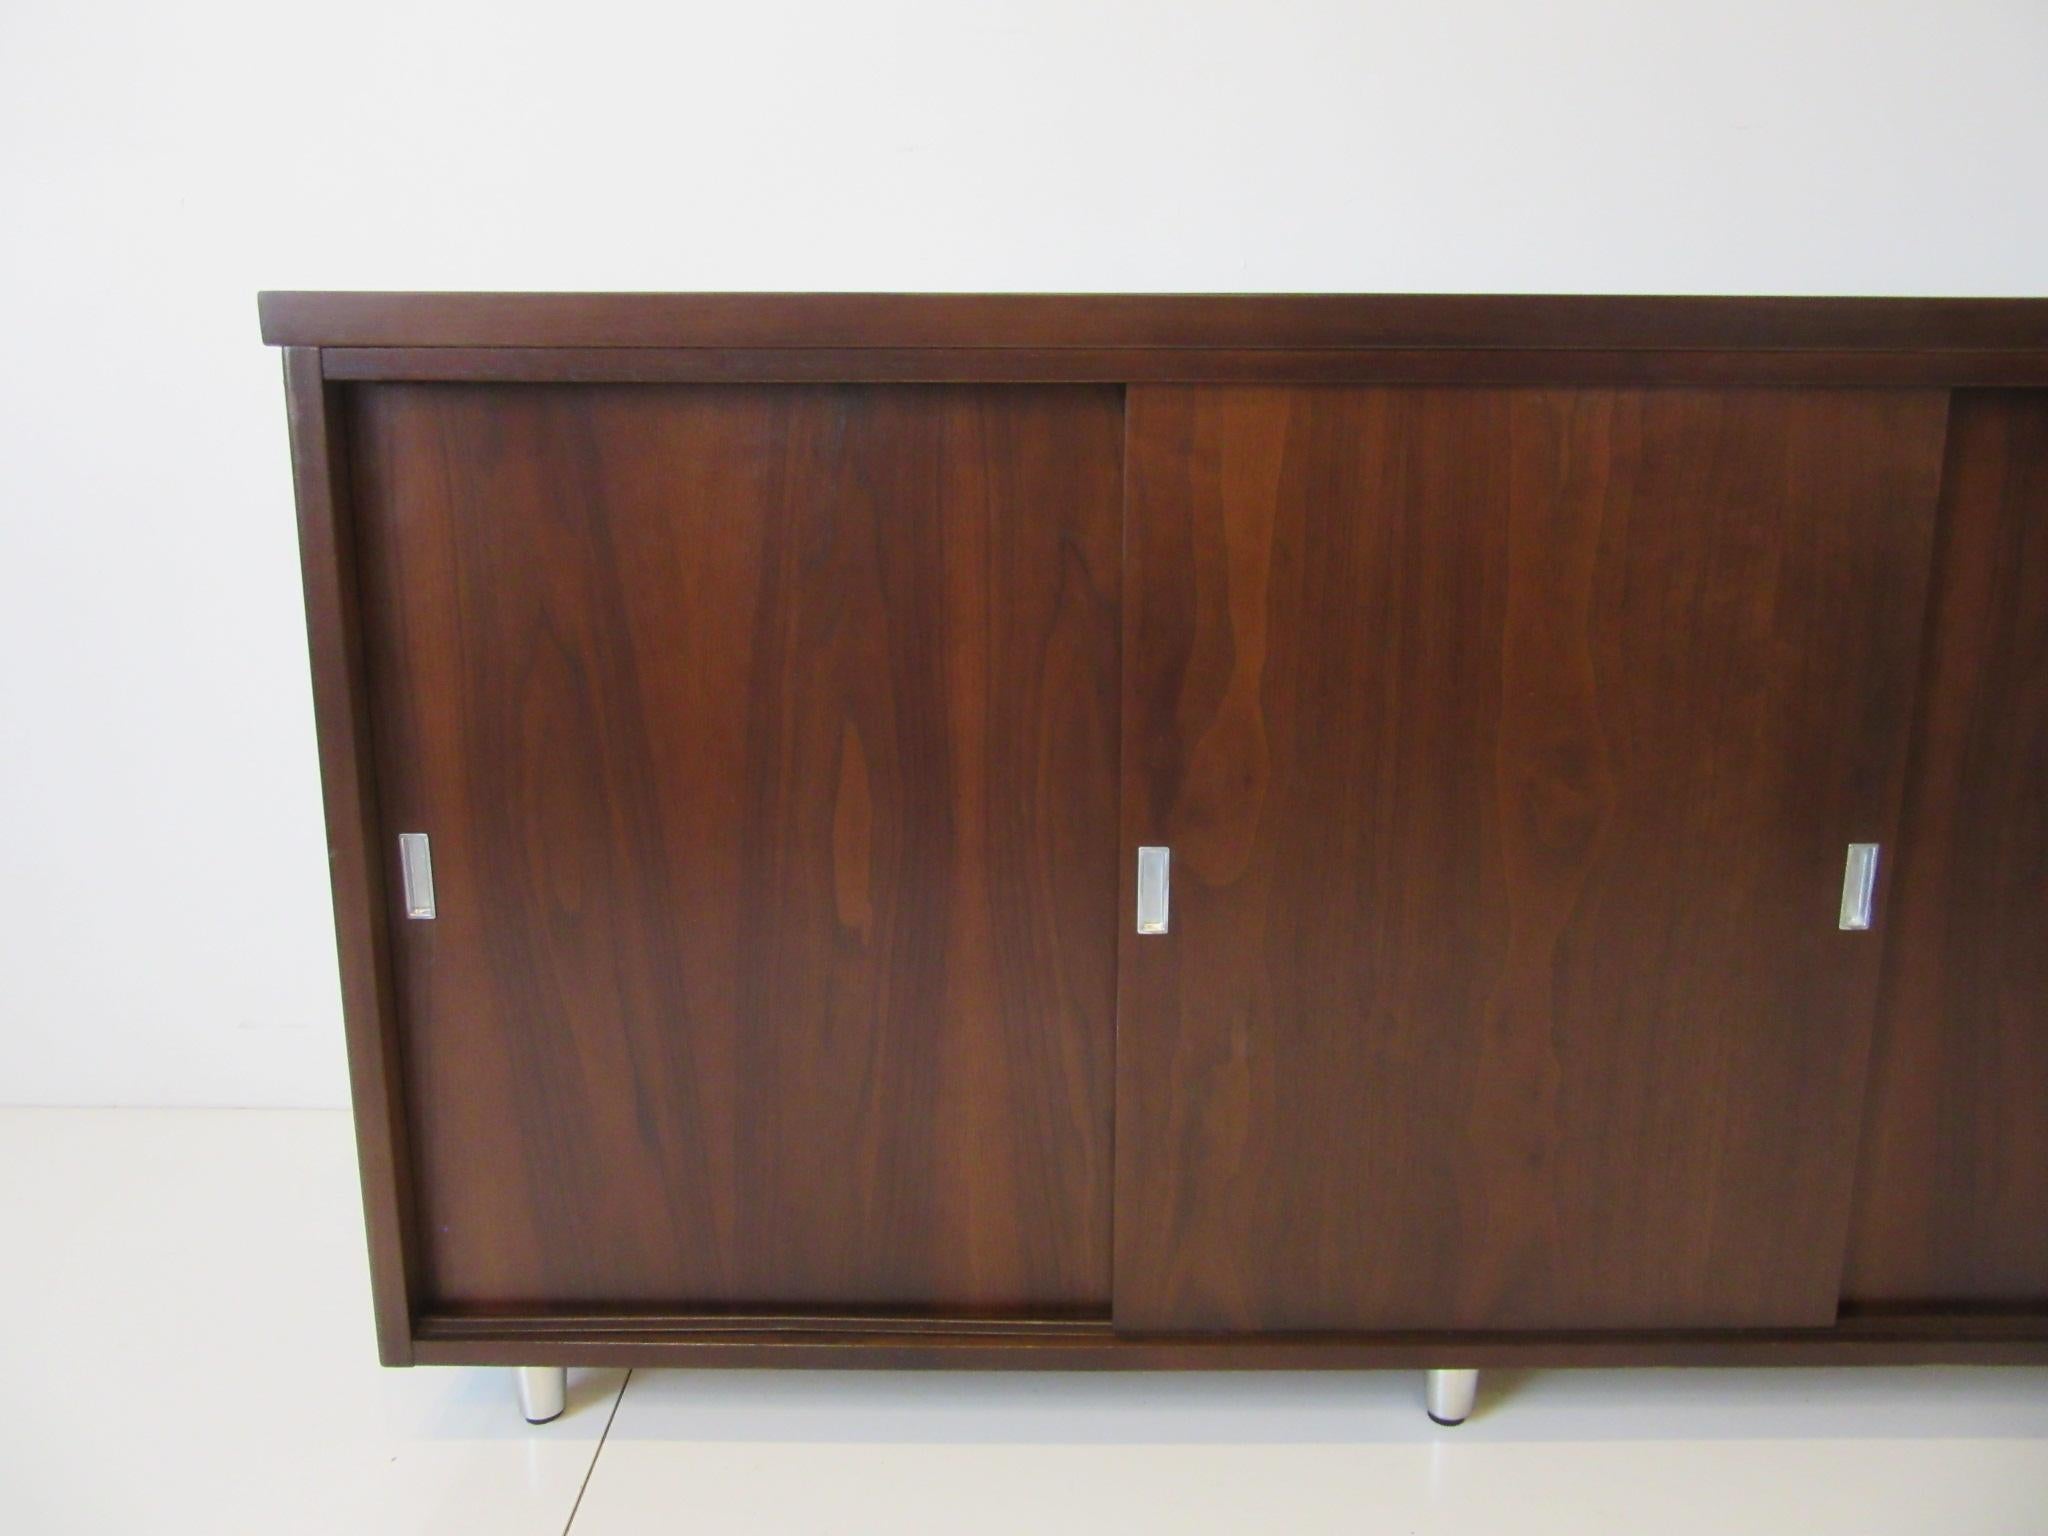 A dark walnut three sliding door credenza with four storage compartments, aluminum pulls and brushed aluminum legs having adjustable foot pads. The piece has a higher profile which is hard to find in a midcentury credenza, very well constructed